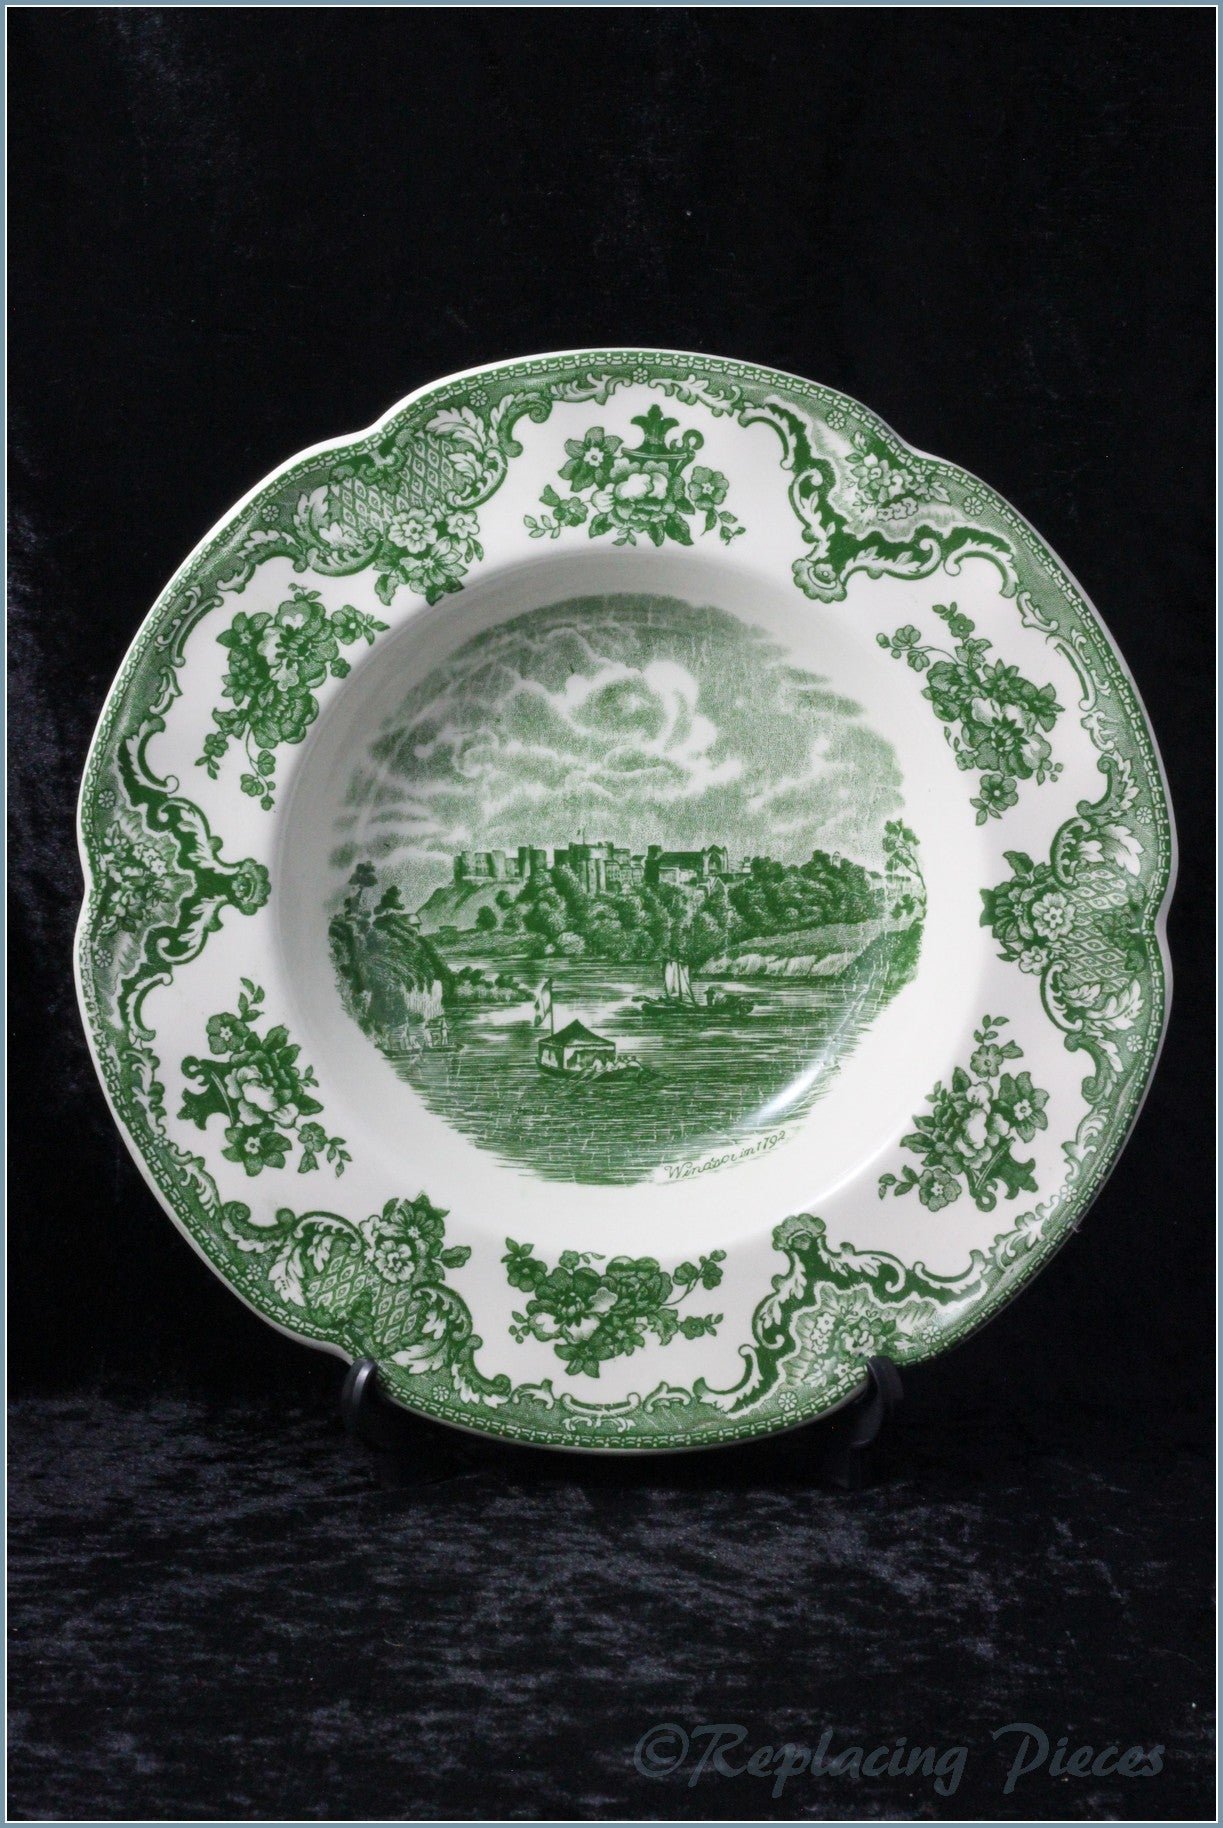 Johnson Brothers - Old Britain Castles (Green) - Rimmed Bowl